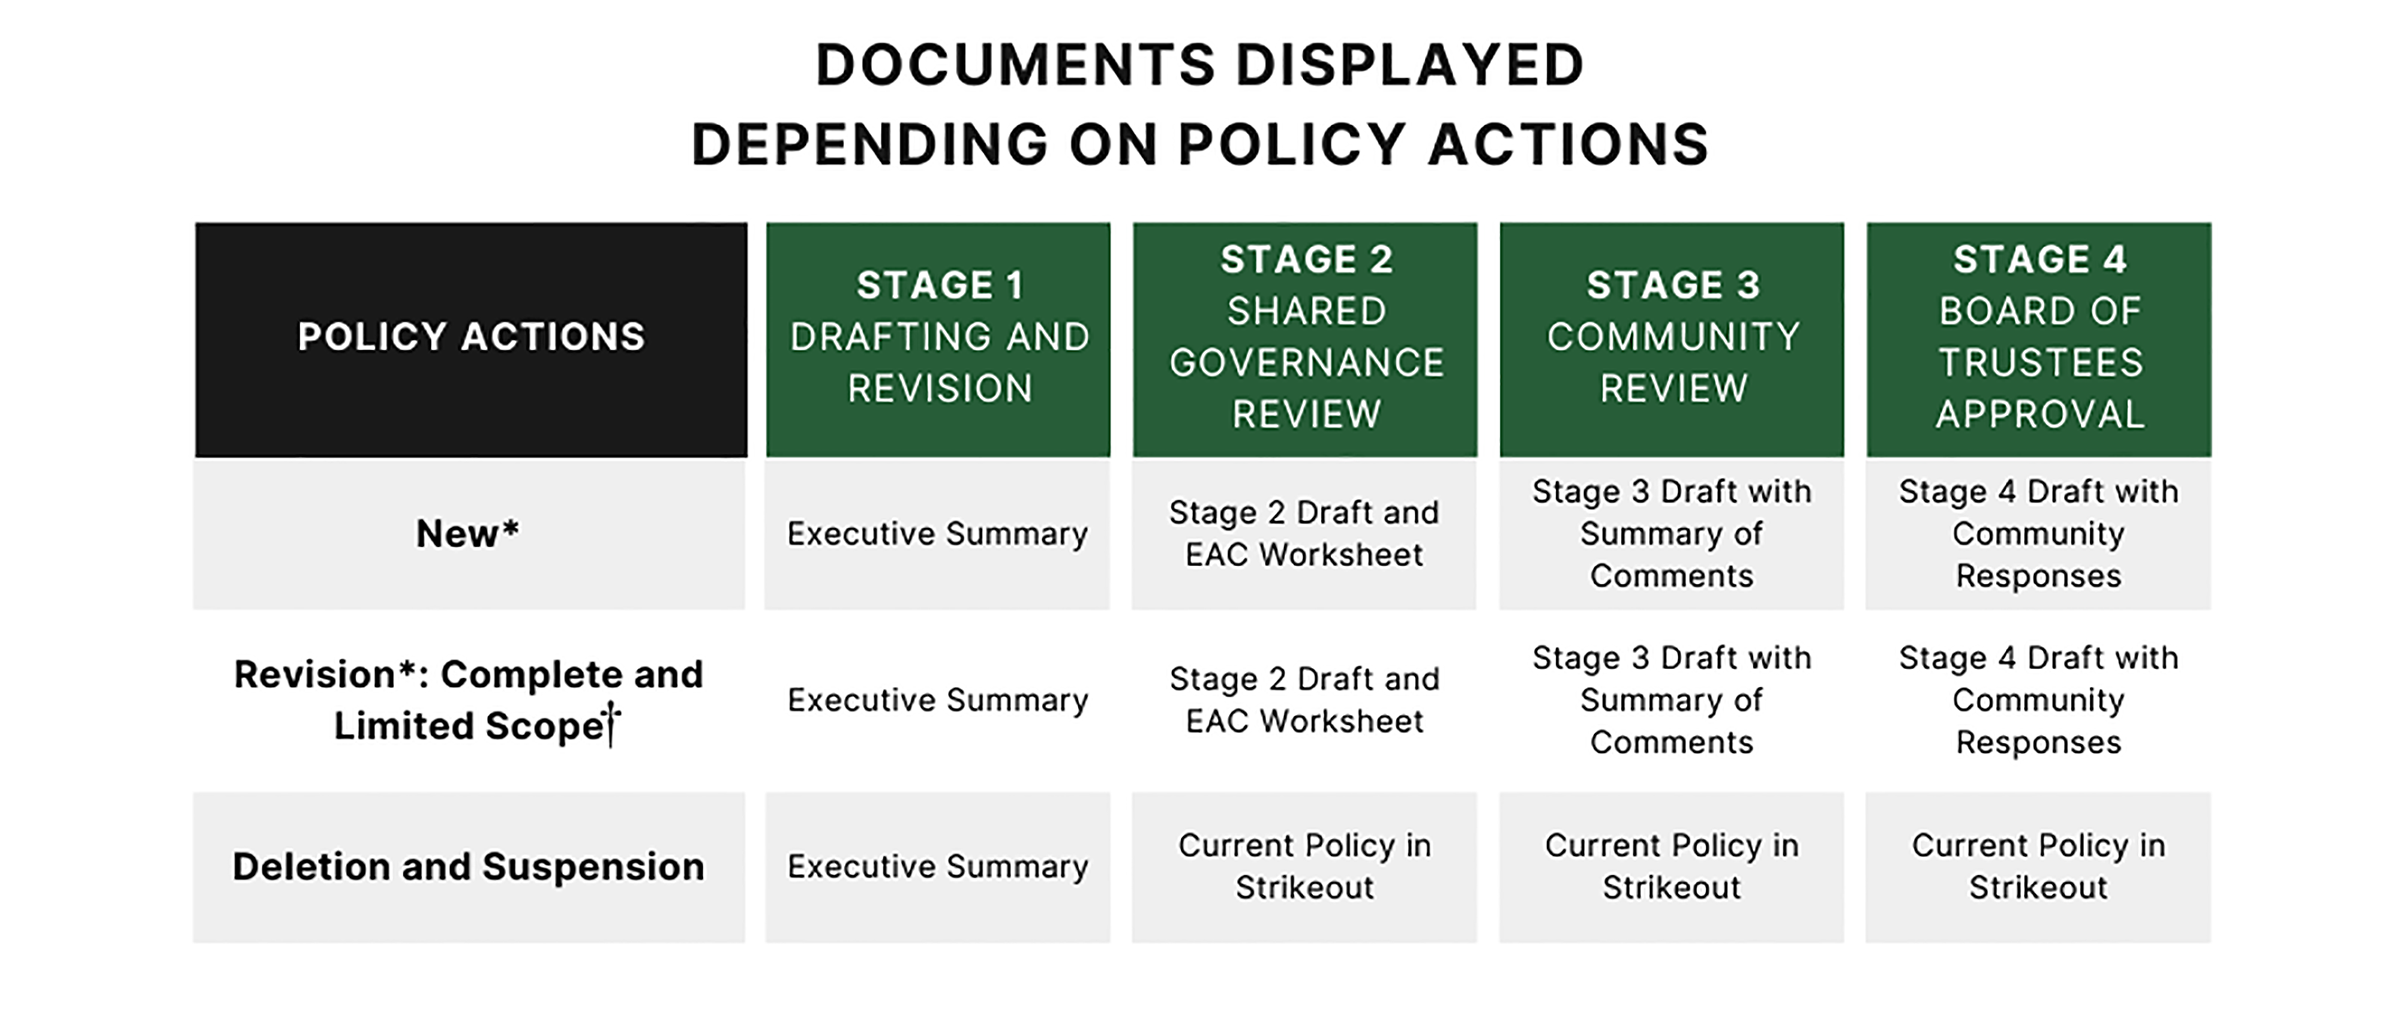 A chart that explains what documents are displayed in the policy pipeline depending on which policy action is occurring in which stage.